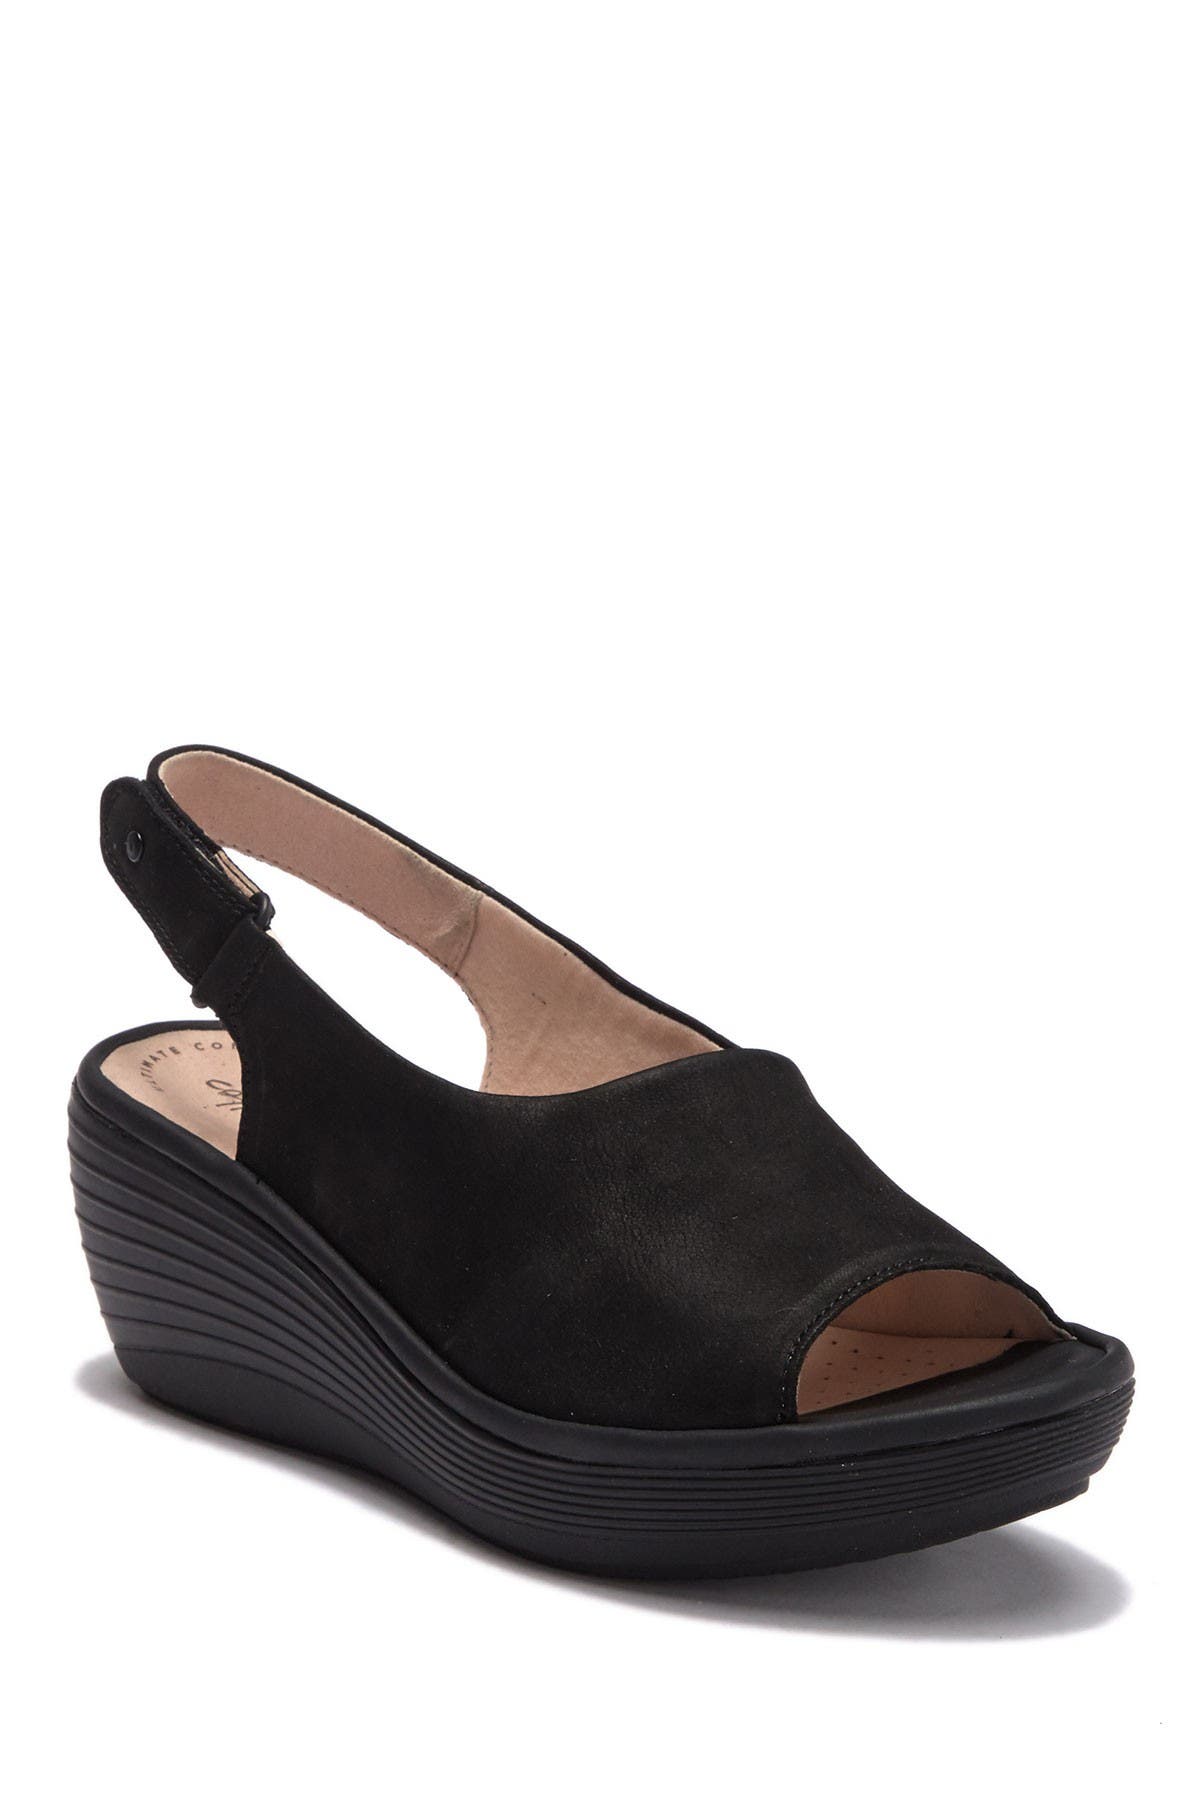 clarks reedly sandals